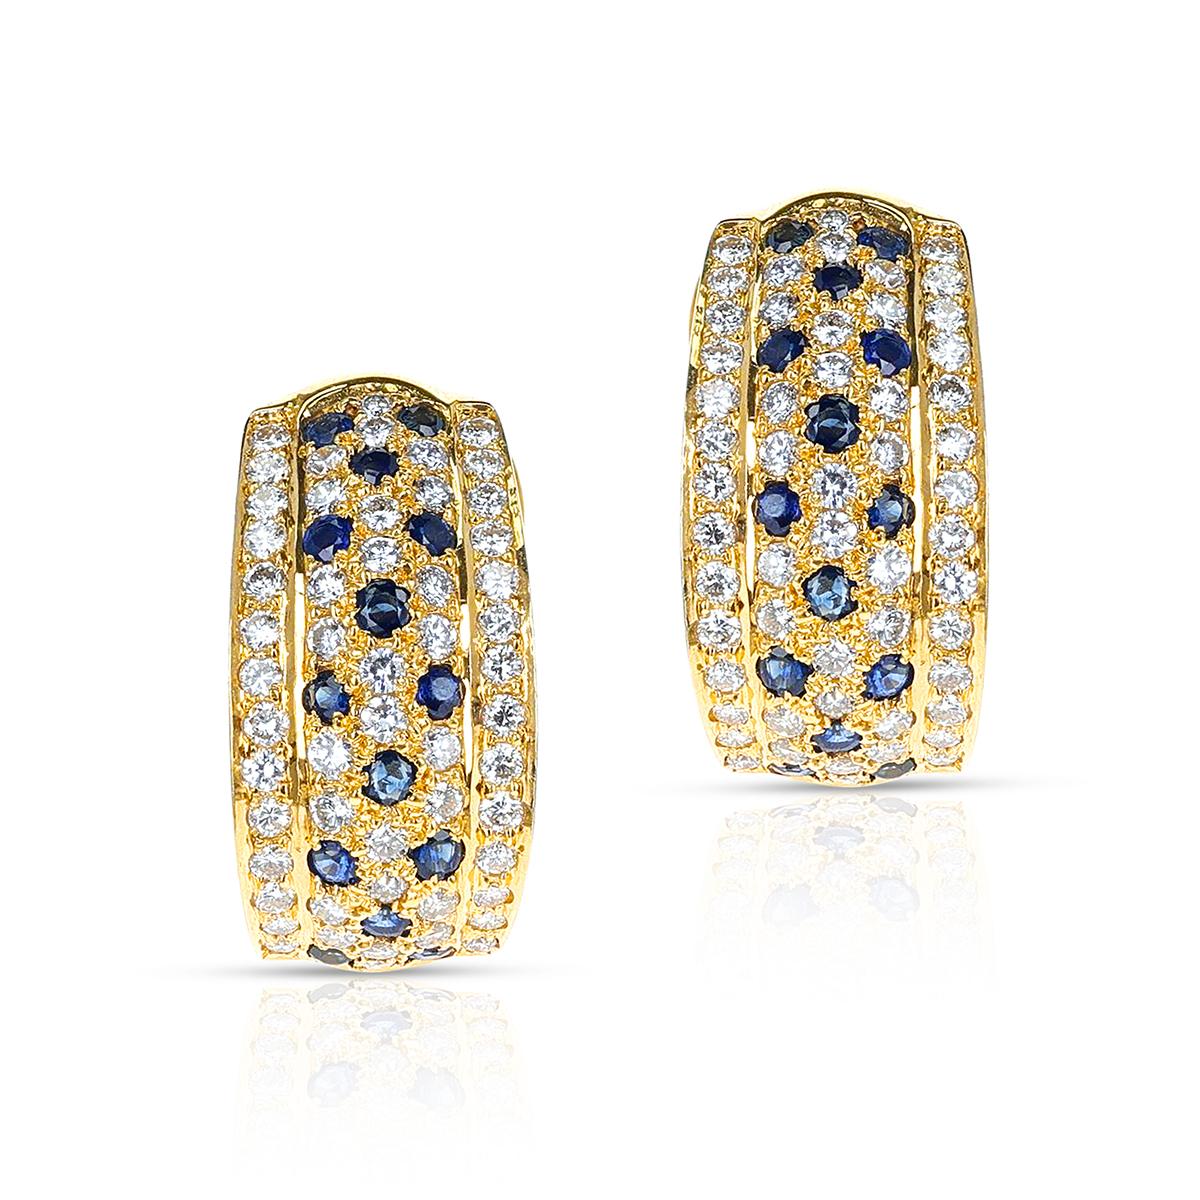 Half-Hoop Diamond and Sapphire Earrings, 18K In Excellent Condition For Sale In New York, NY